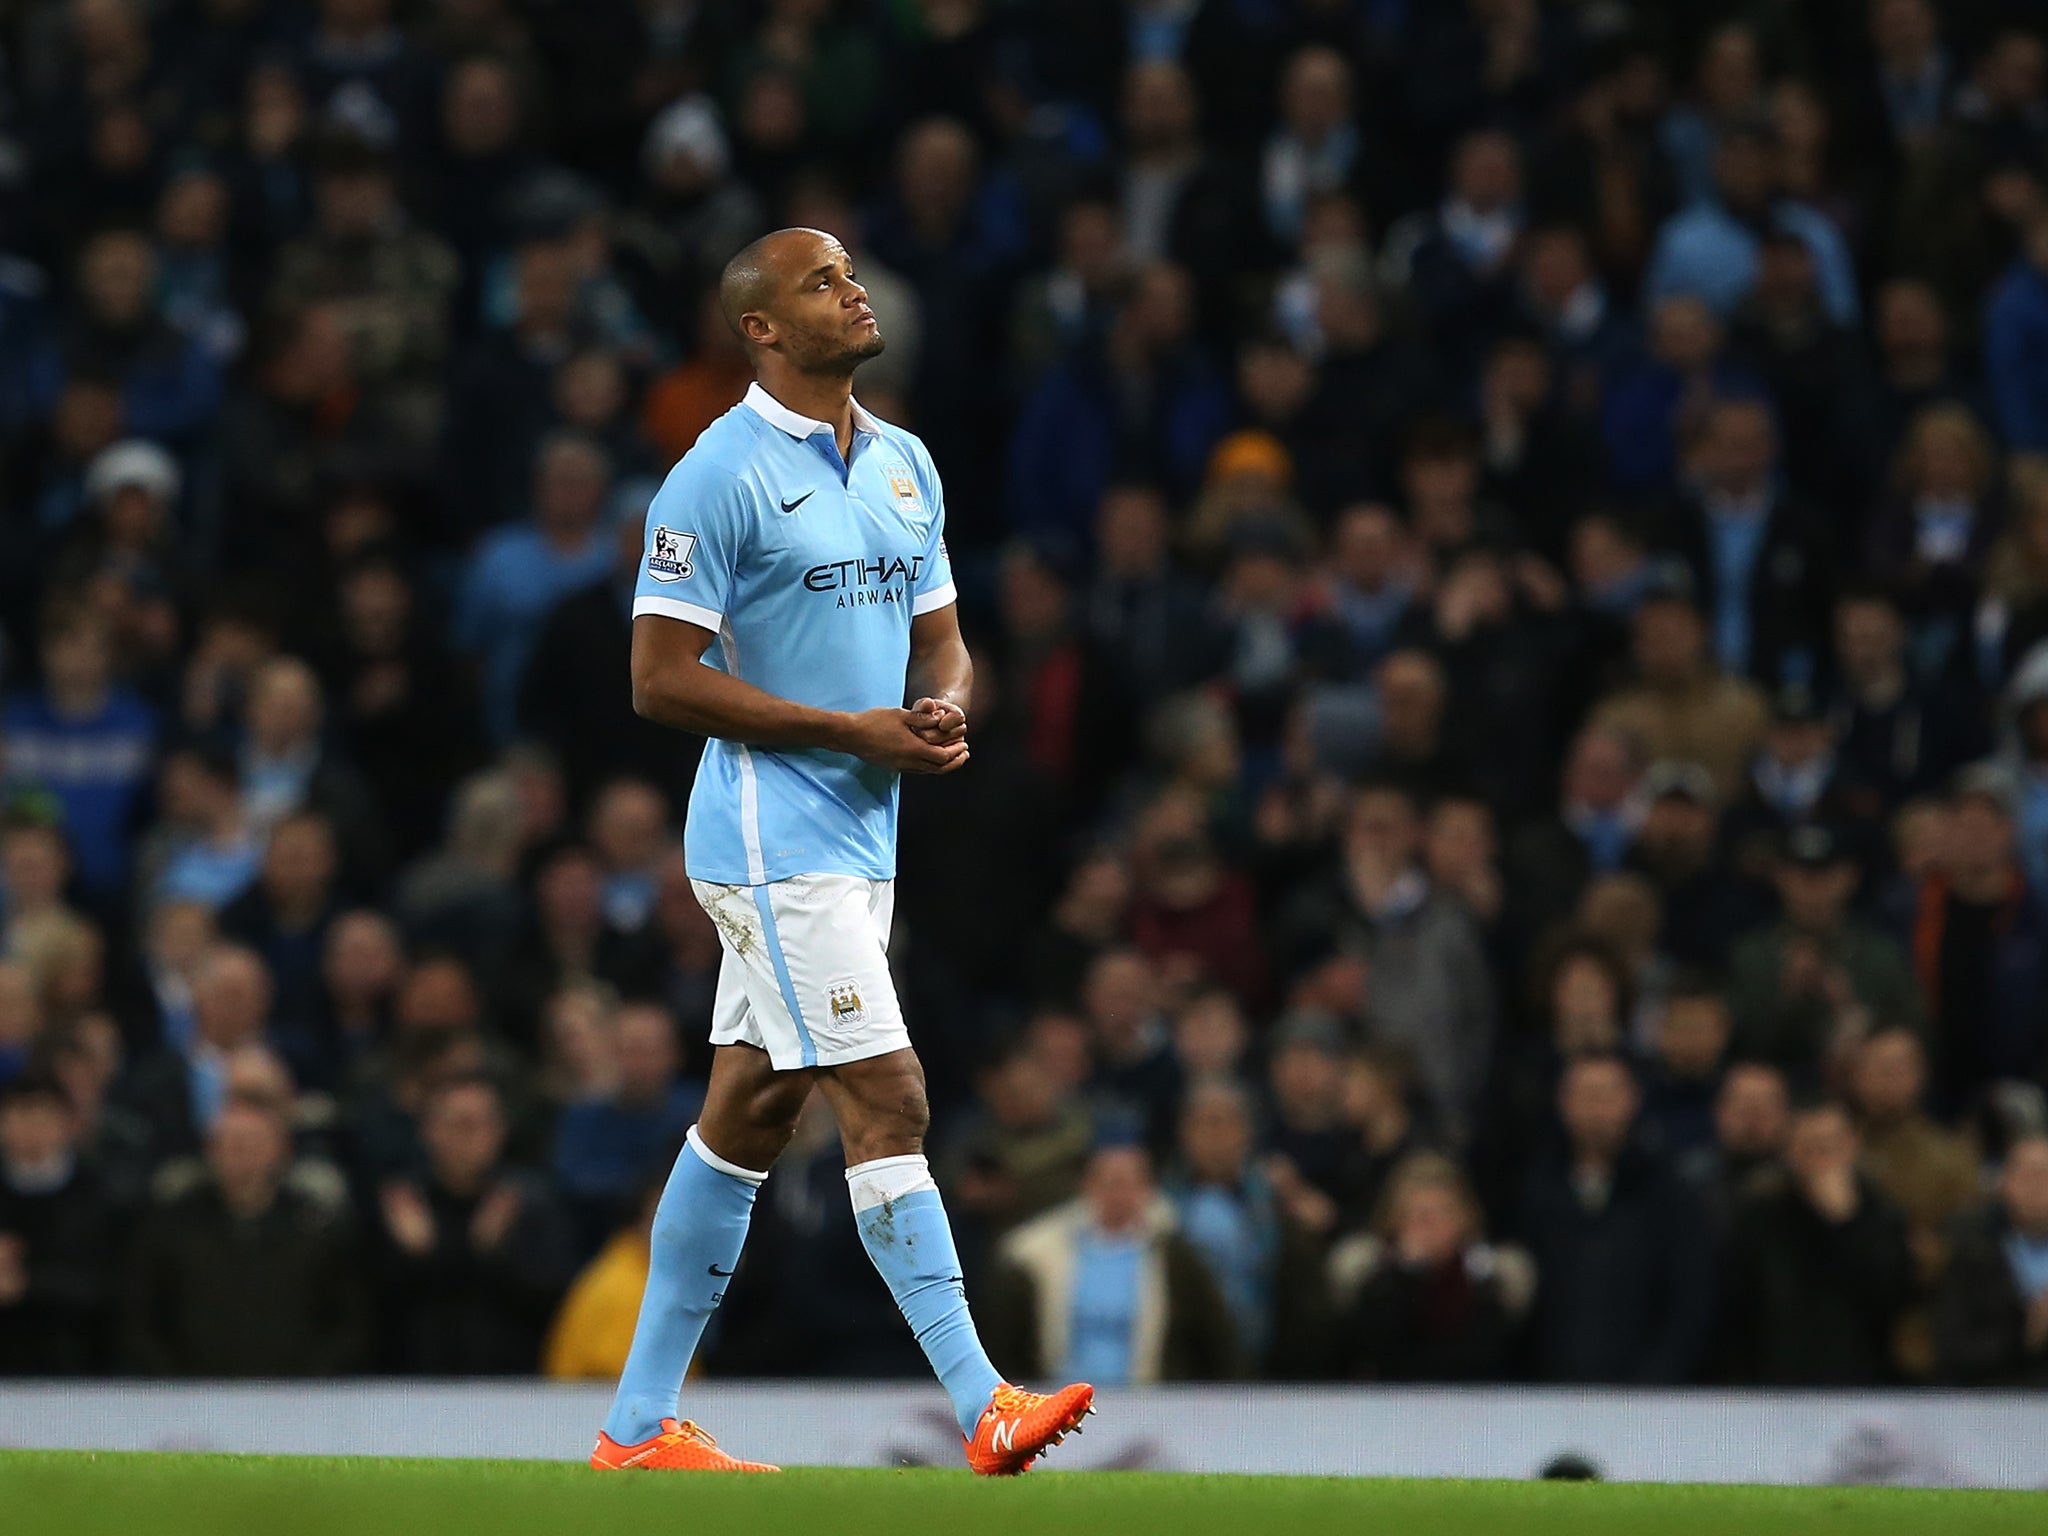 Manchester City defender Vincent Kompany hobbles off after succumbing to a calf injury against Sunderland